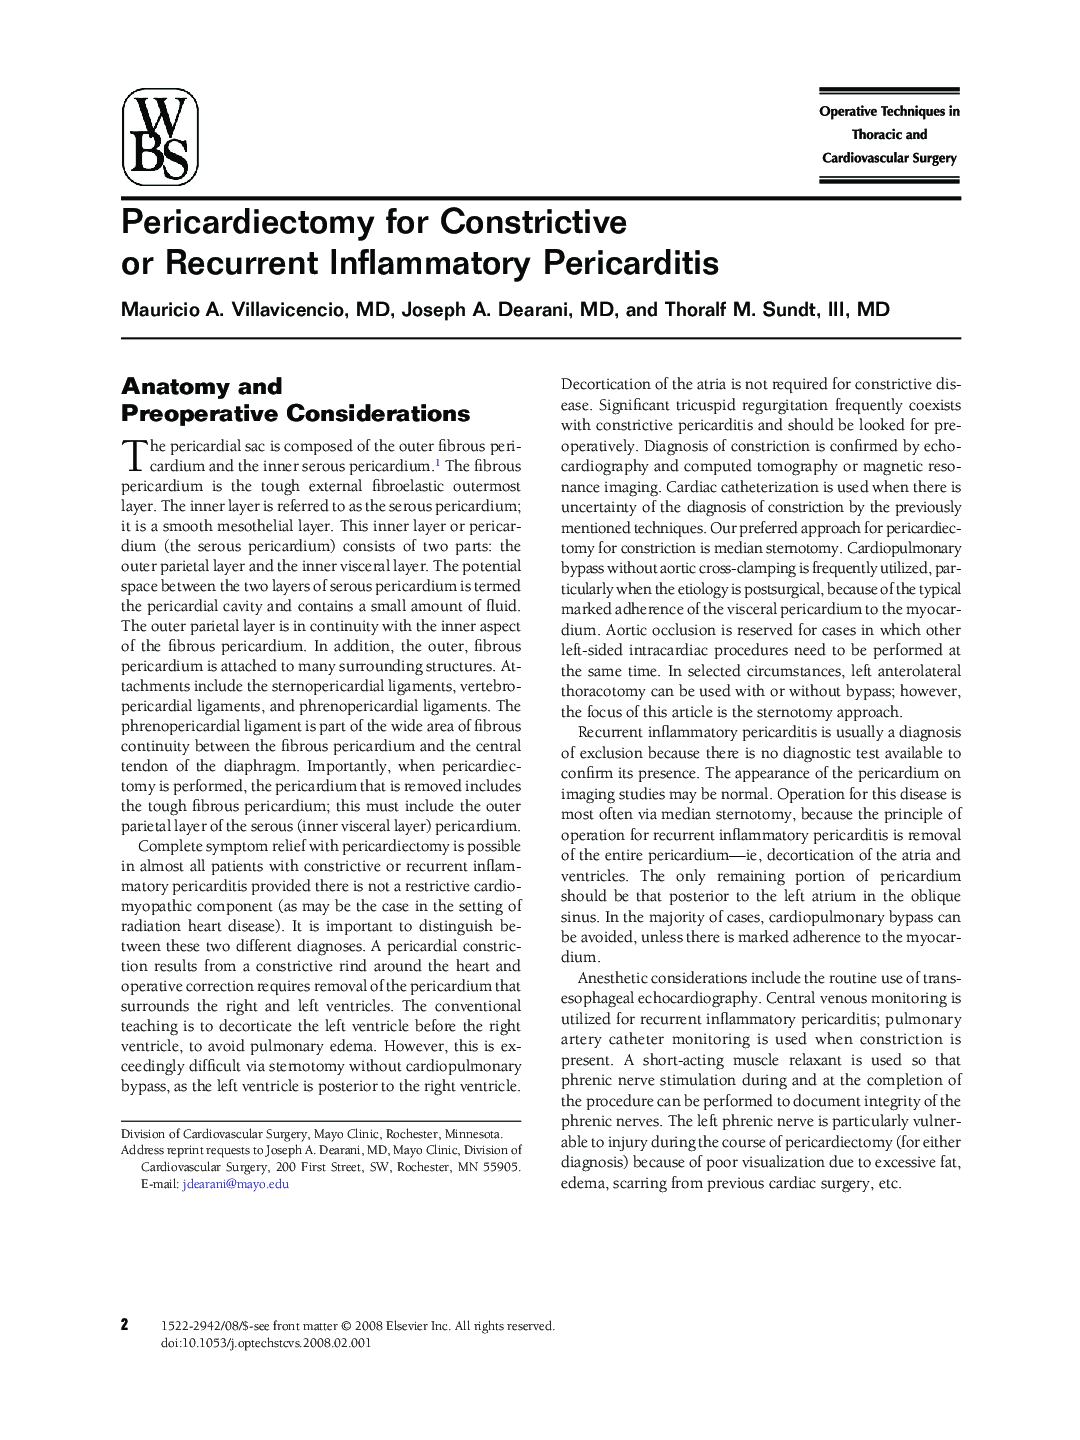 Pericardiectomy for Constrictive or Recurrent Inflammatory Pericarditis